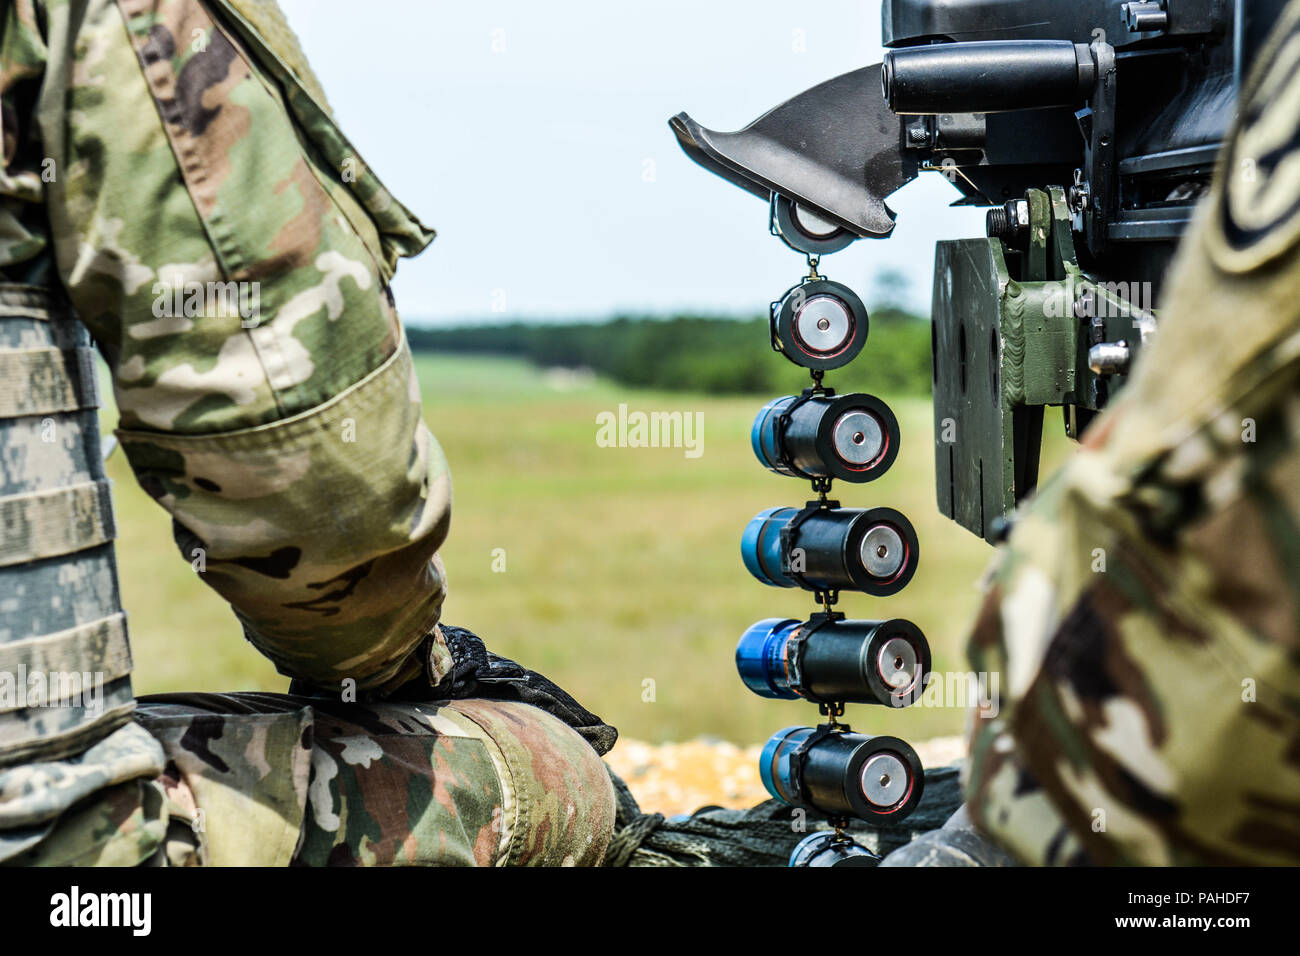 Mark 19 40 mm grenade machine amunition locked and loaded  during Operation Cold Steel II hosted by US Army Civil Affairs and Psychological Operations Command (Airborne), July 13, 2018 at Joint Base McGuire- Dix-Lakehurst, NJ. Operation Cold Steel is the U.S. Army Reserve's crew-served weapons qualification and validation exercise to ensure America's Army Reserve units and Soldiers are trained and ready to deploy on short notice as part of Ready Force X and bring combat-ready and lethal firepower in support of the Army and our joint partners anywhere around the world. (U.S. Army Reserve photo  Stock Photo